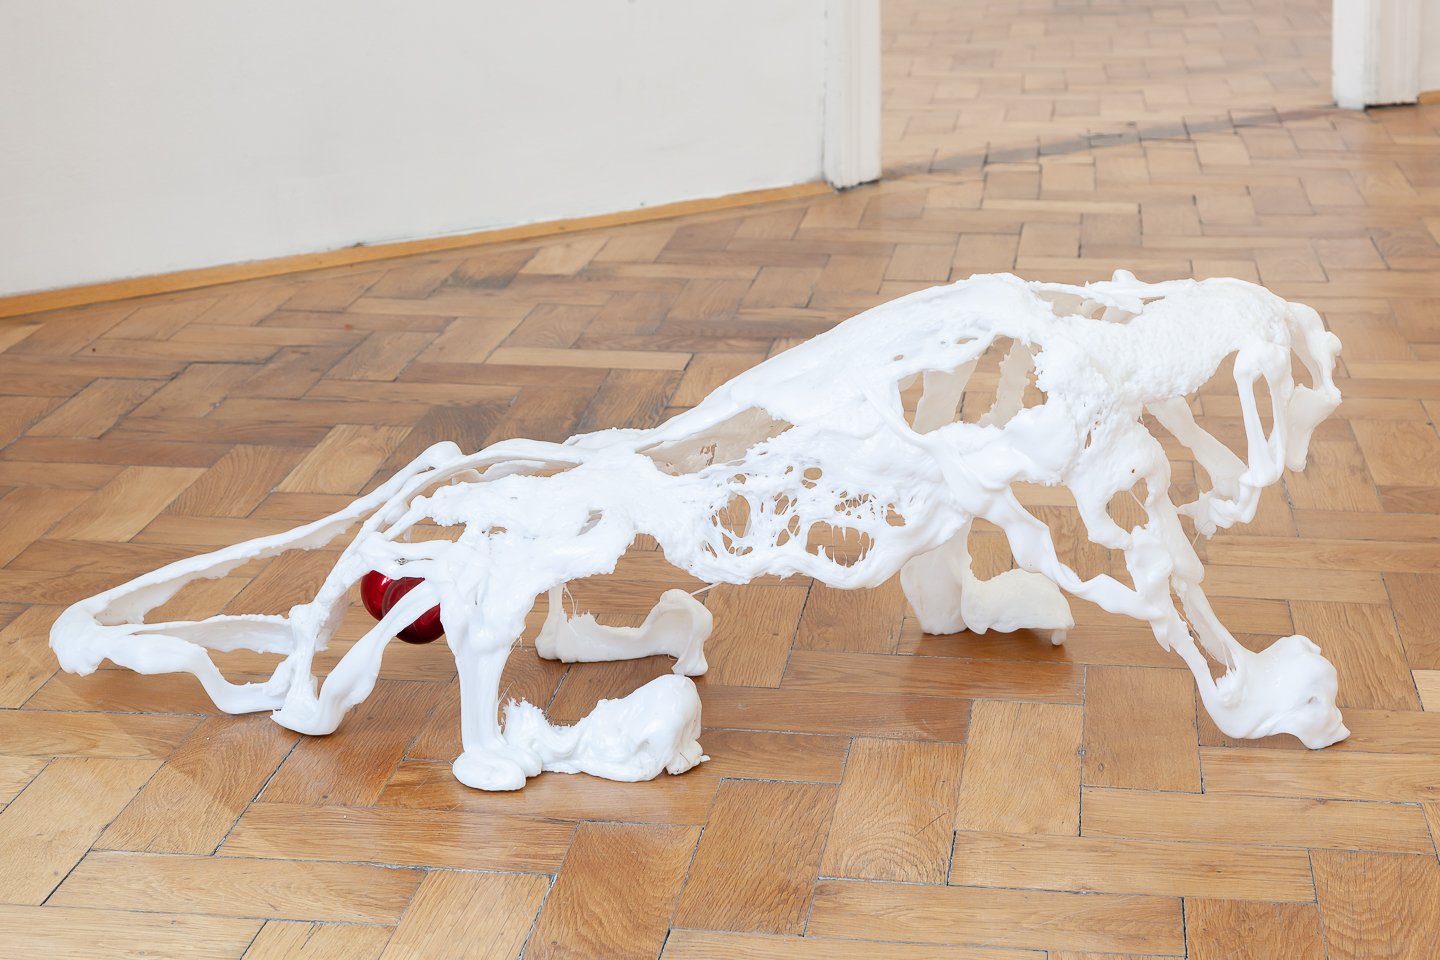 Raphaela Vogel*1988 in Nürnberg, lives and works in BerlinTesticles of the Tiger2022, Polyurethane-Elastomer, Weihnachtsbaumkugeln40 x 110 x 40 cm (circa) Photography: Flavio Palasciano